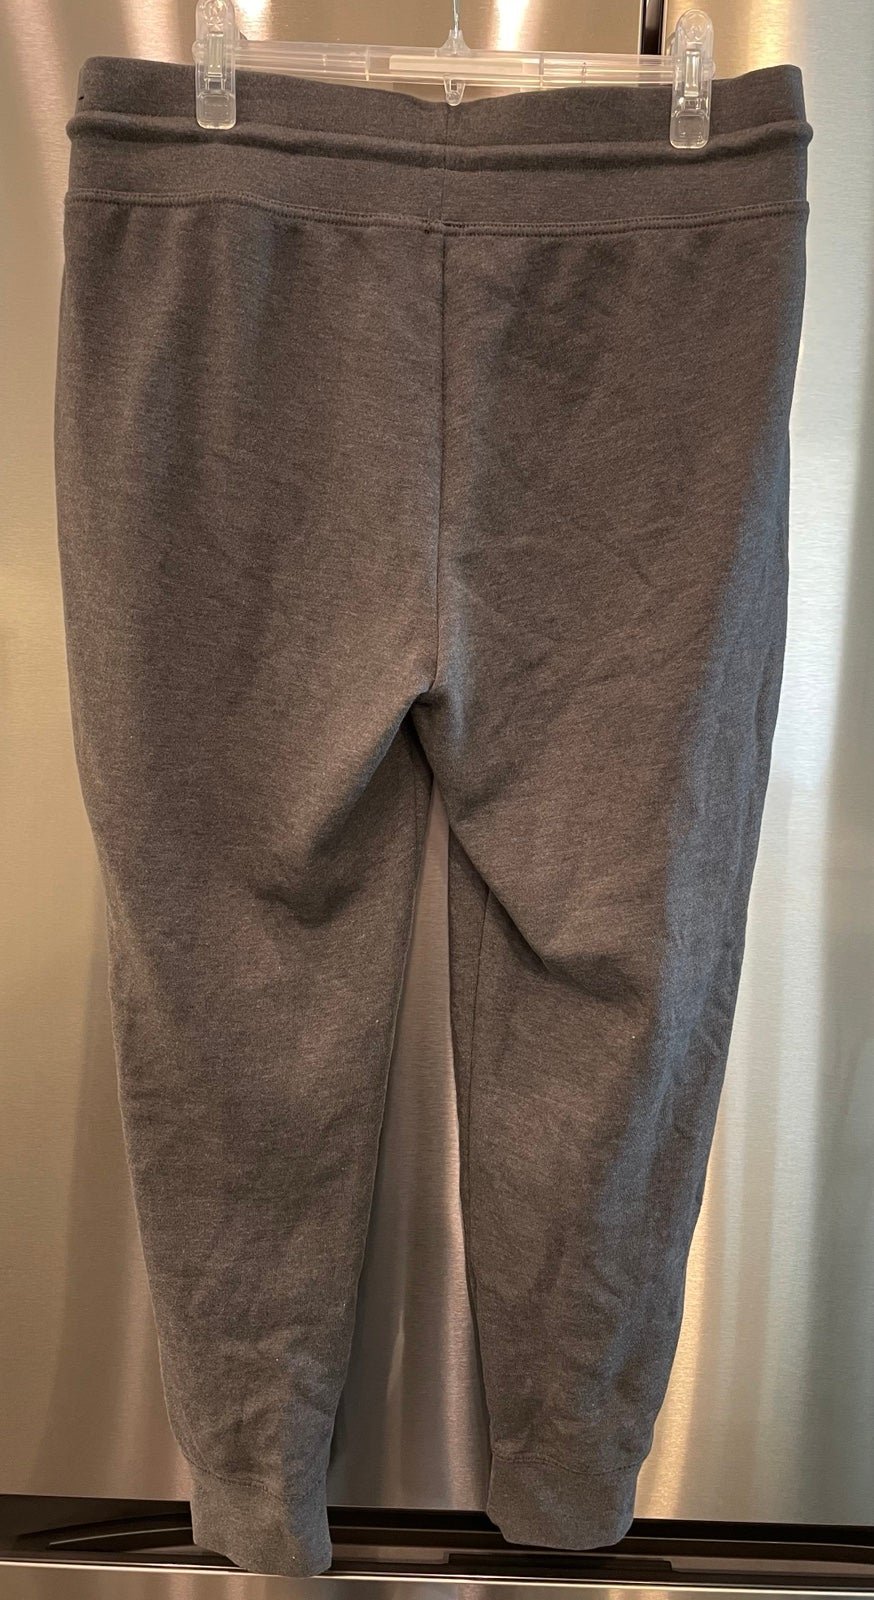 the Lowest price DSG Women’s Gray Joggers Size Large-Worn Once JLmDEPPmQ Low Price